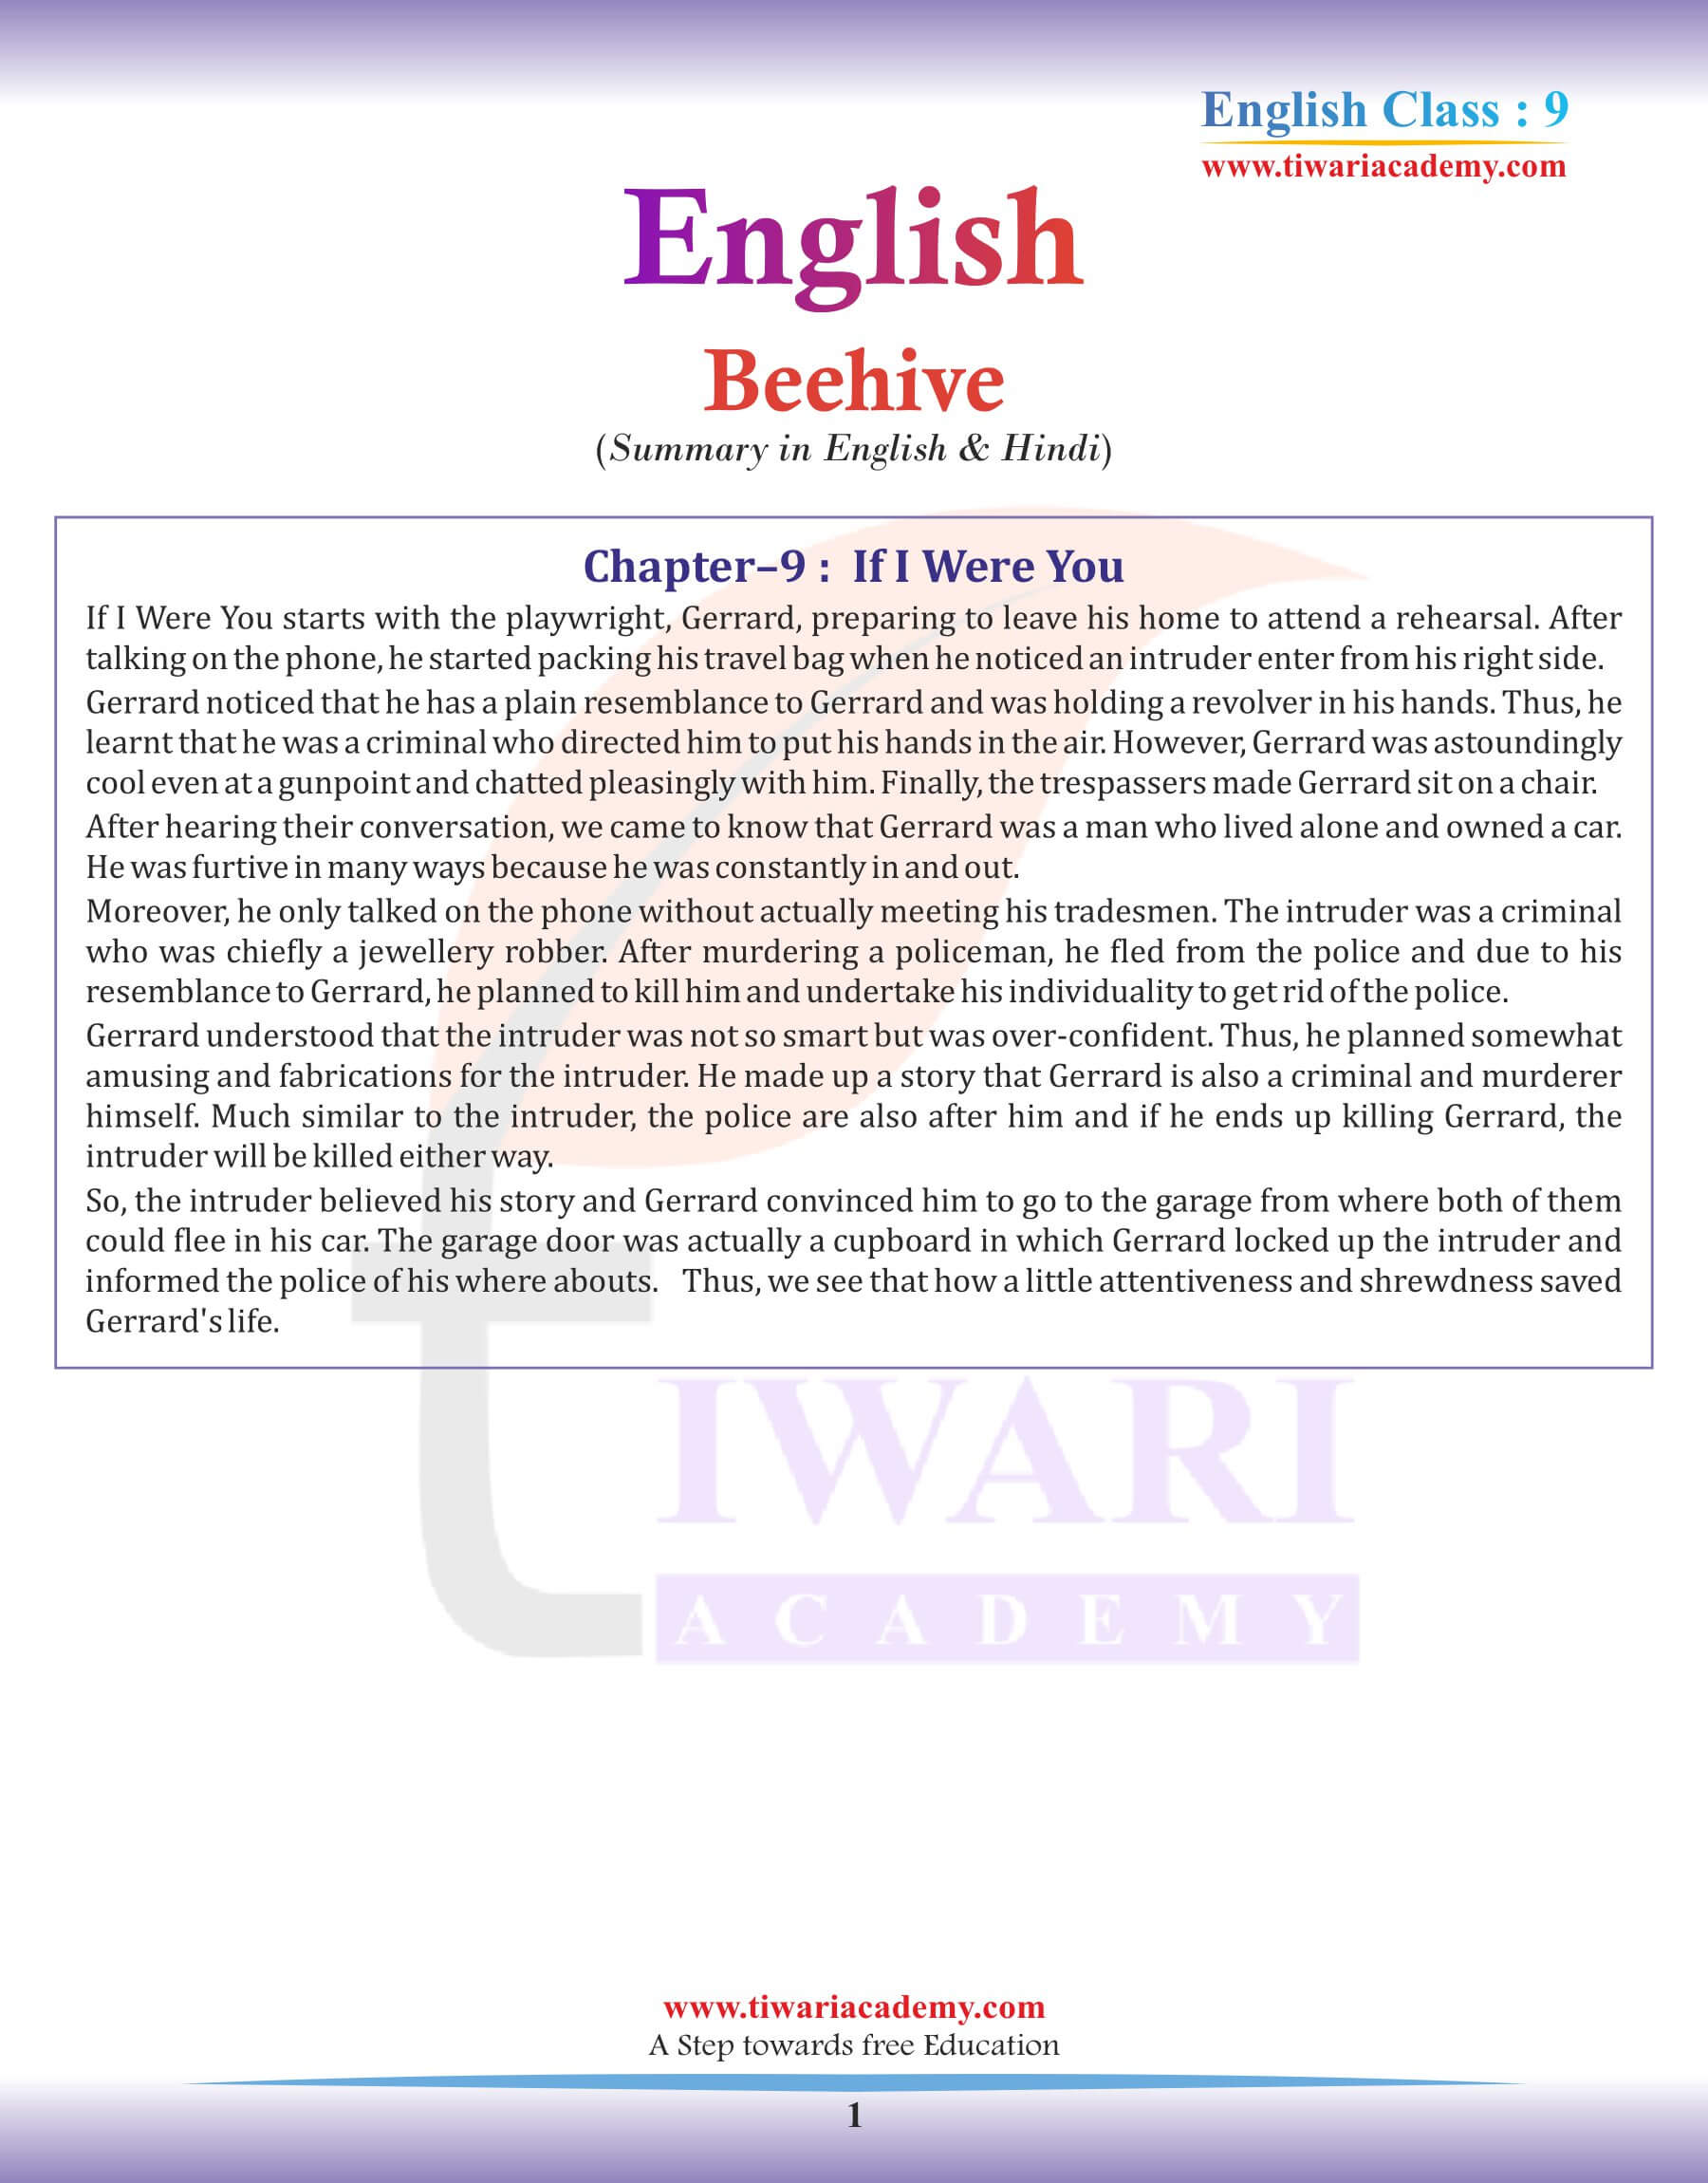 Class 9 English Beehive Chapter 9 Summary in English